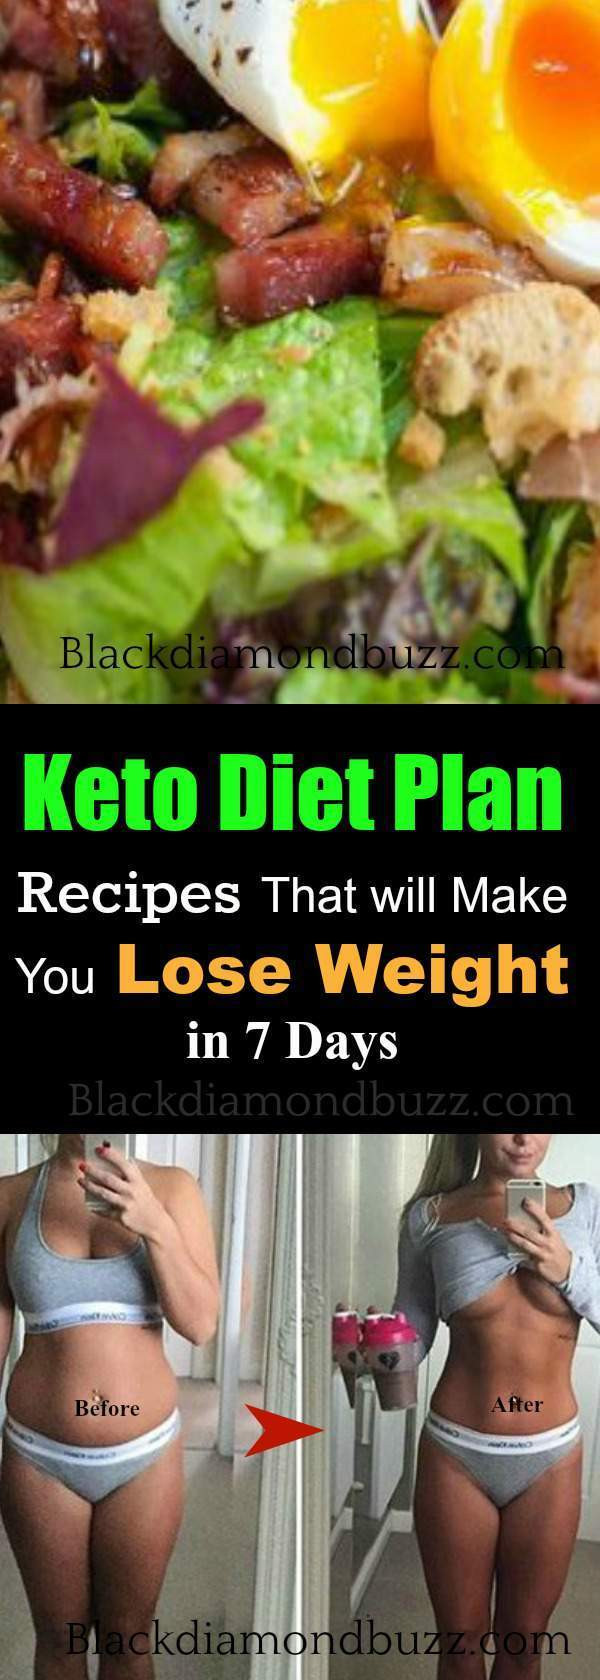 Keto Diet Bloating
 Keto Diet Plan Recipes That Will Make You Lose Weight in 7